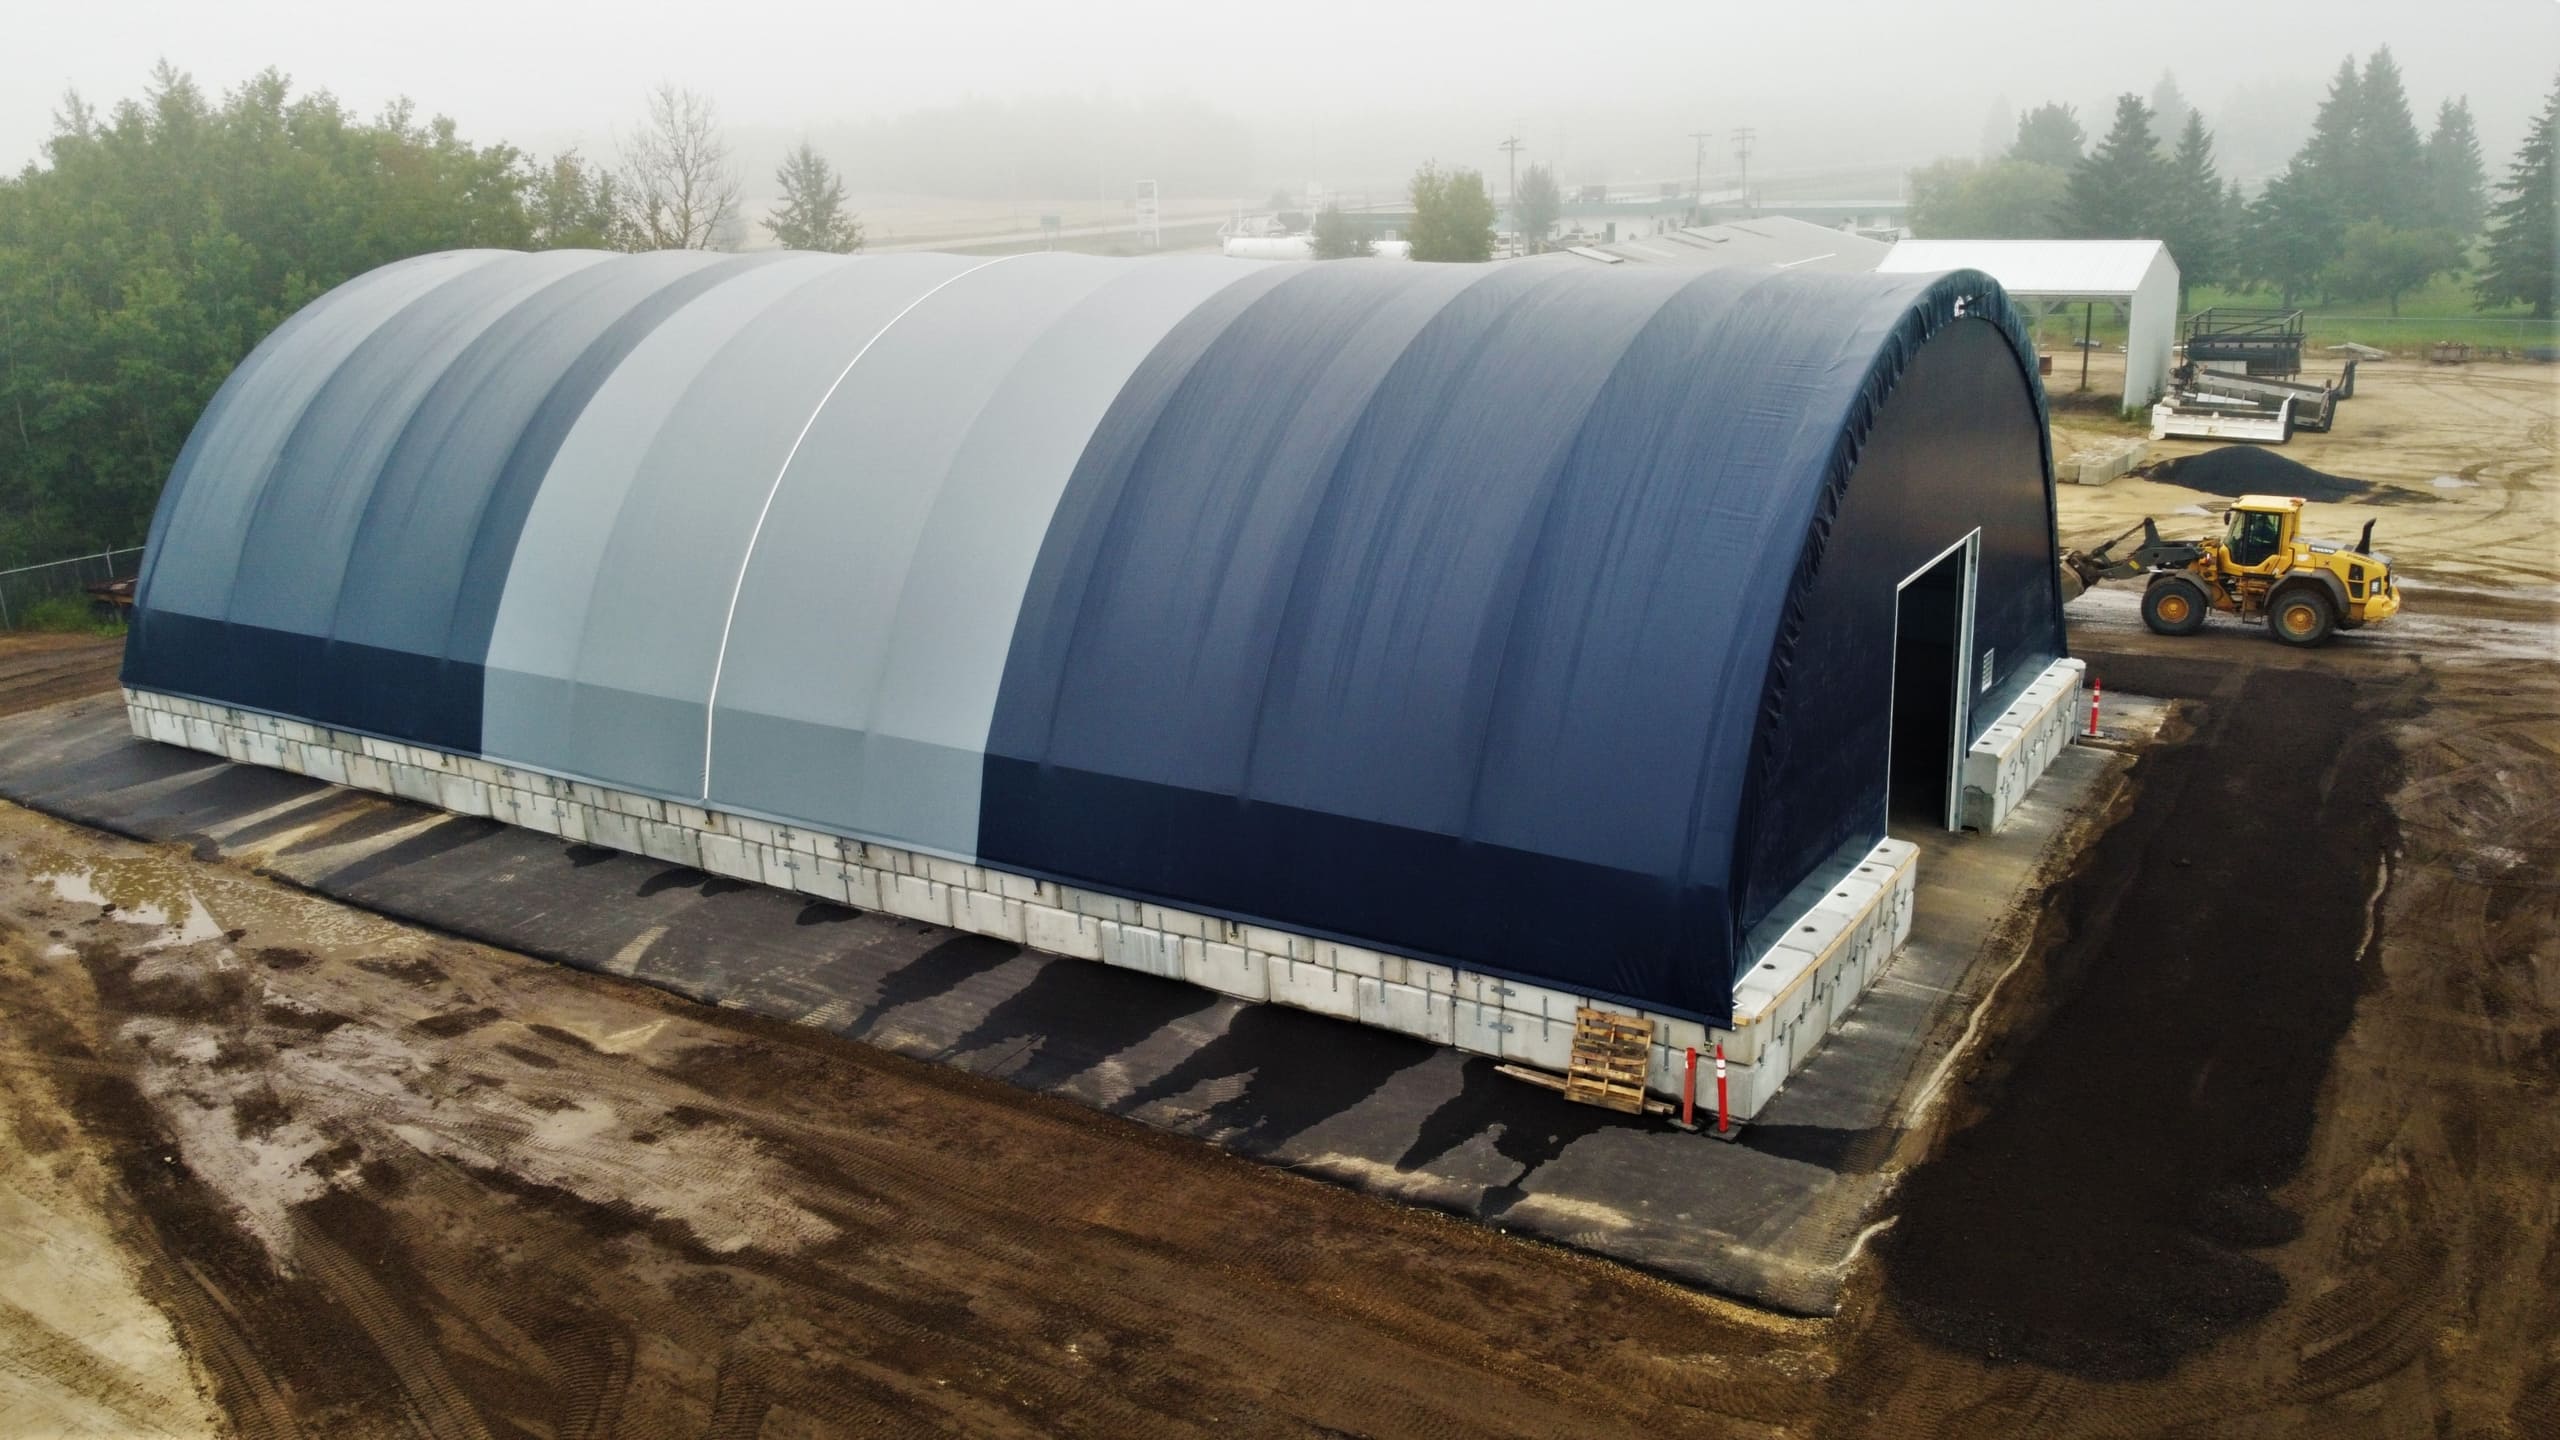 Improving Bulk Storage with Fabric Structures